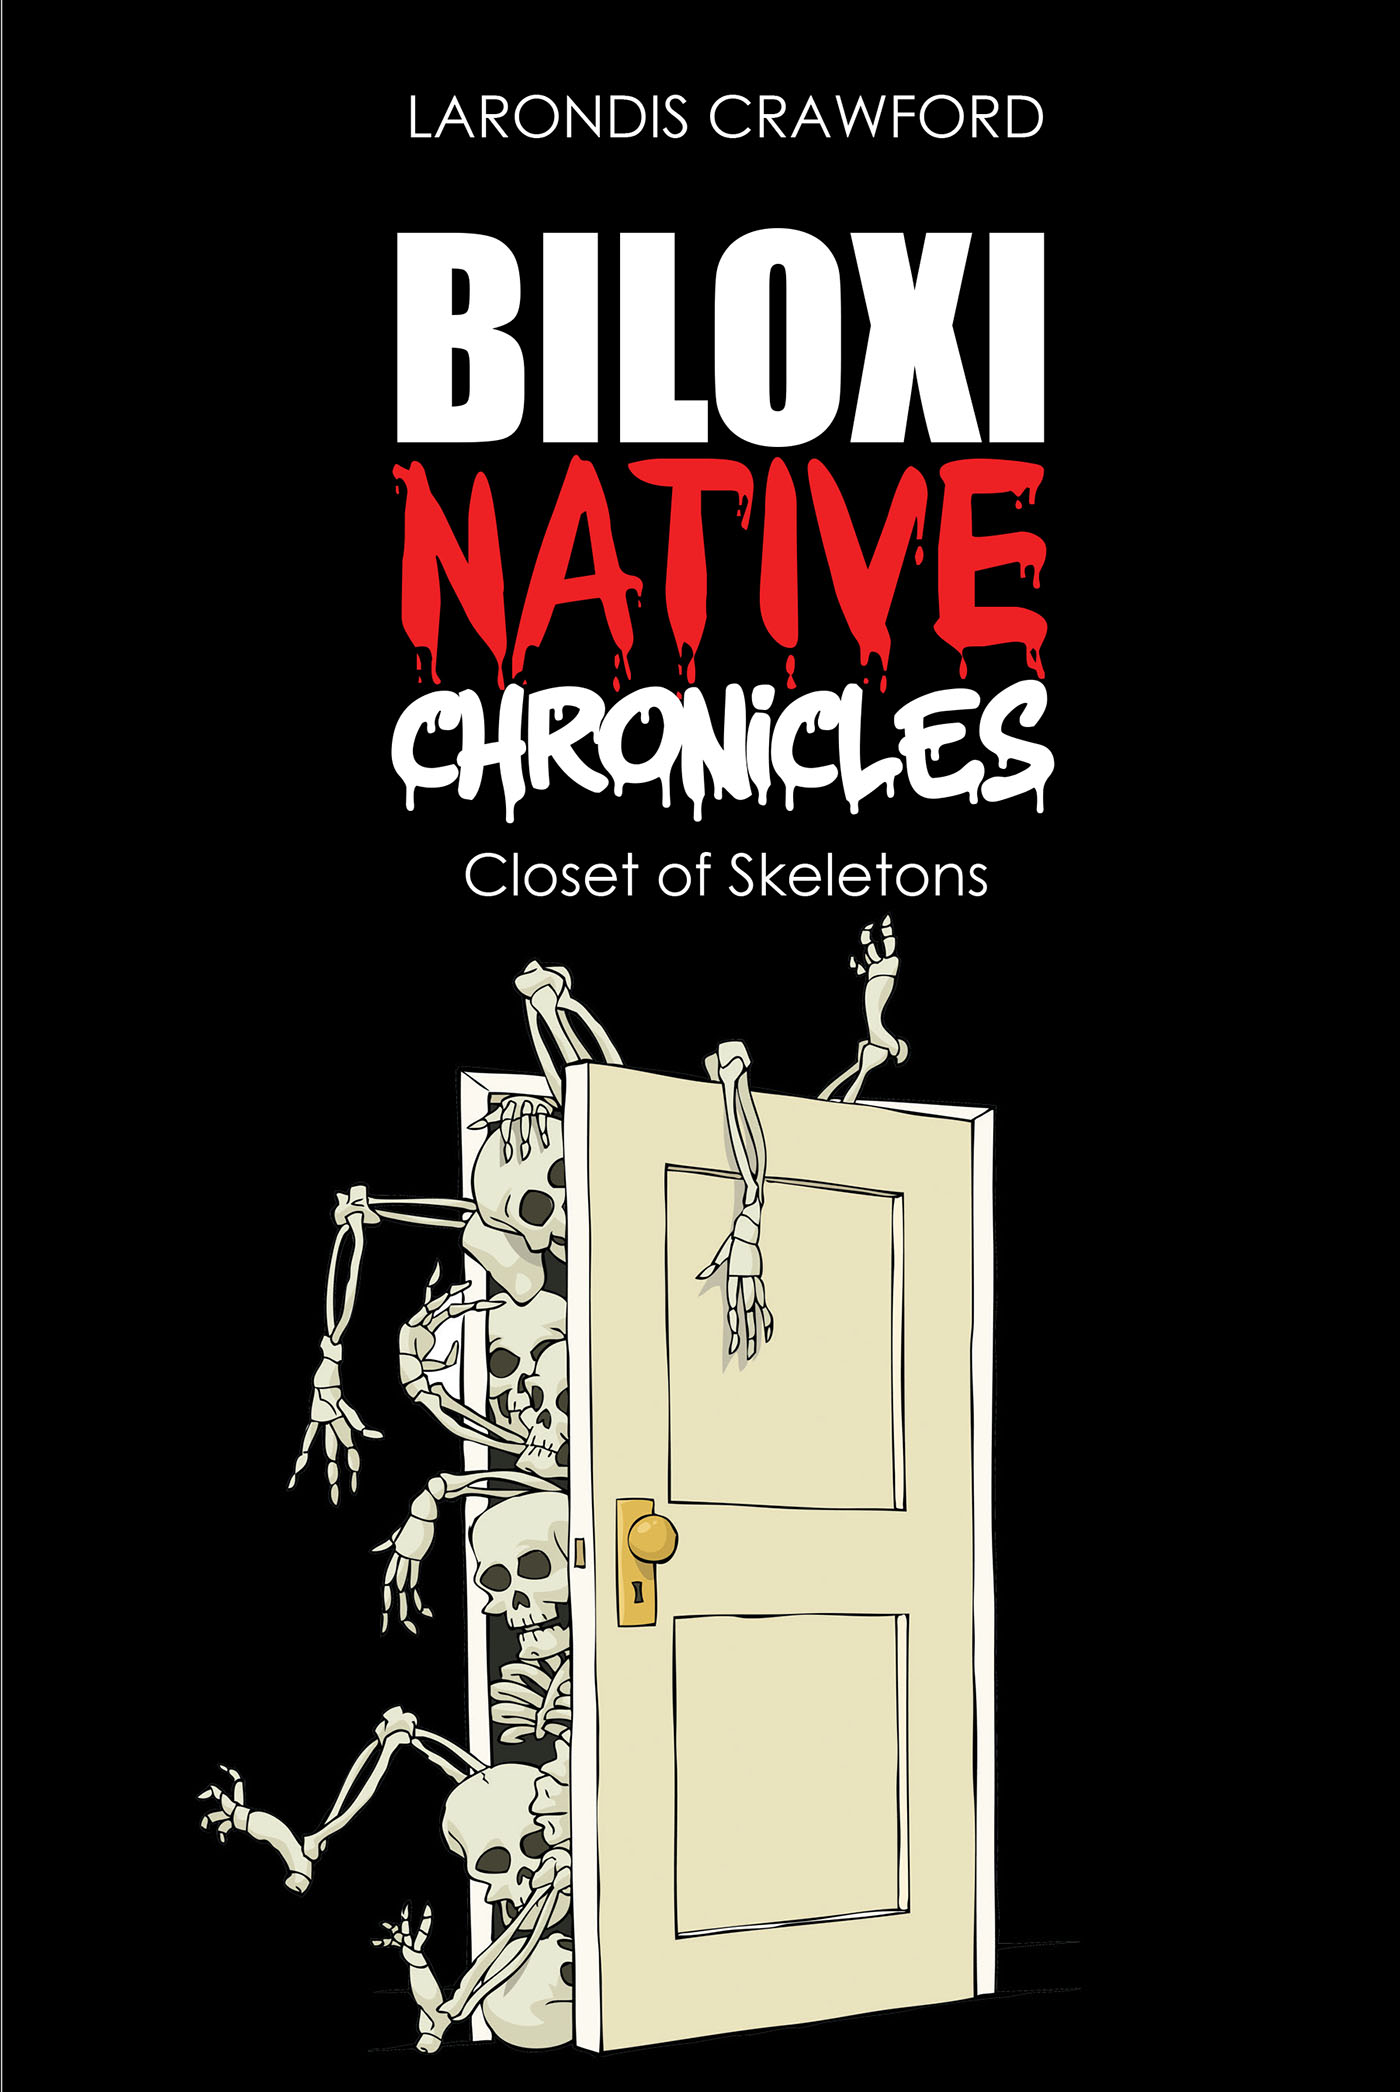 Author Larondis Crawford’s New Book, "Biloxi Native Chronicles: Closet of Skeletons," is a Suspenseful and Gripping Tale of Crime, Passion, and Its Consequences